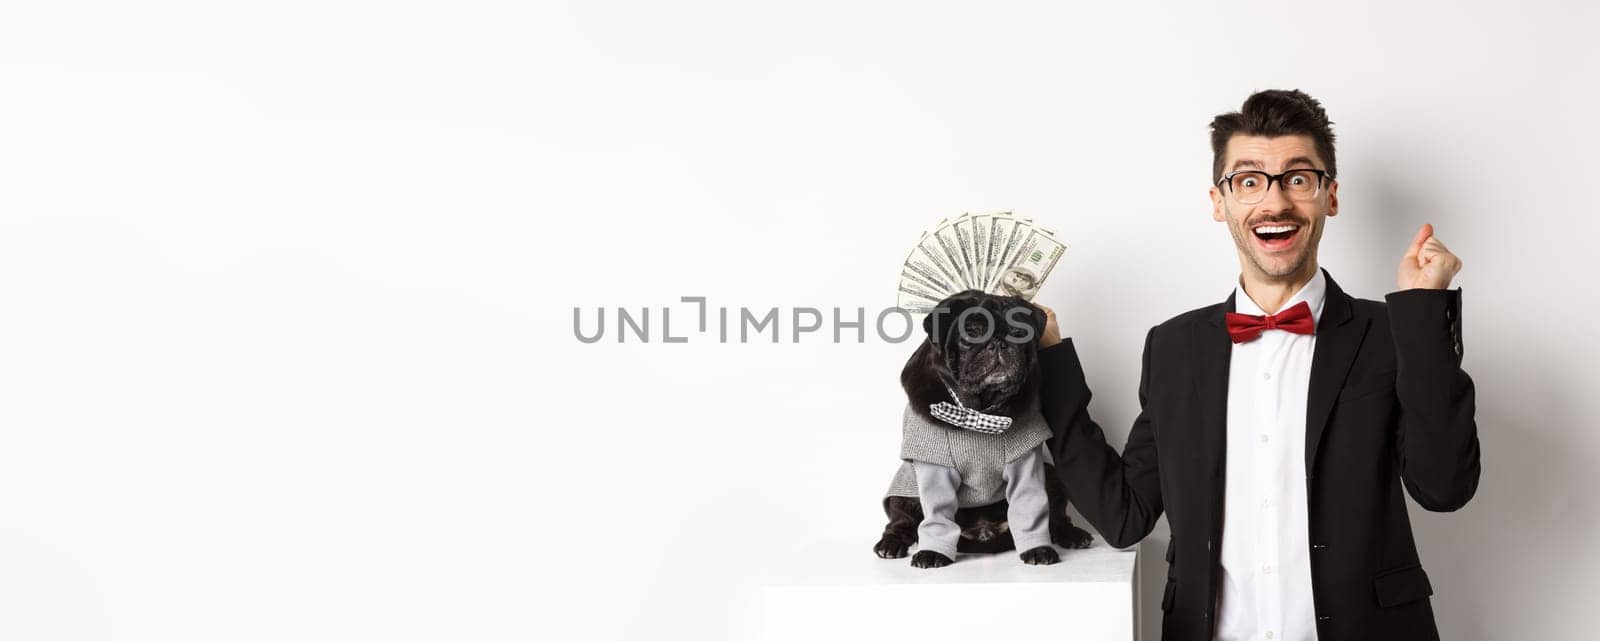 Happy man winning money, wearing costume and showing dollars near his cute black dog in suit, standing over white background.